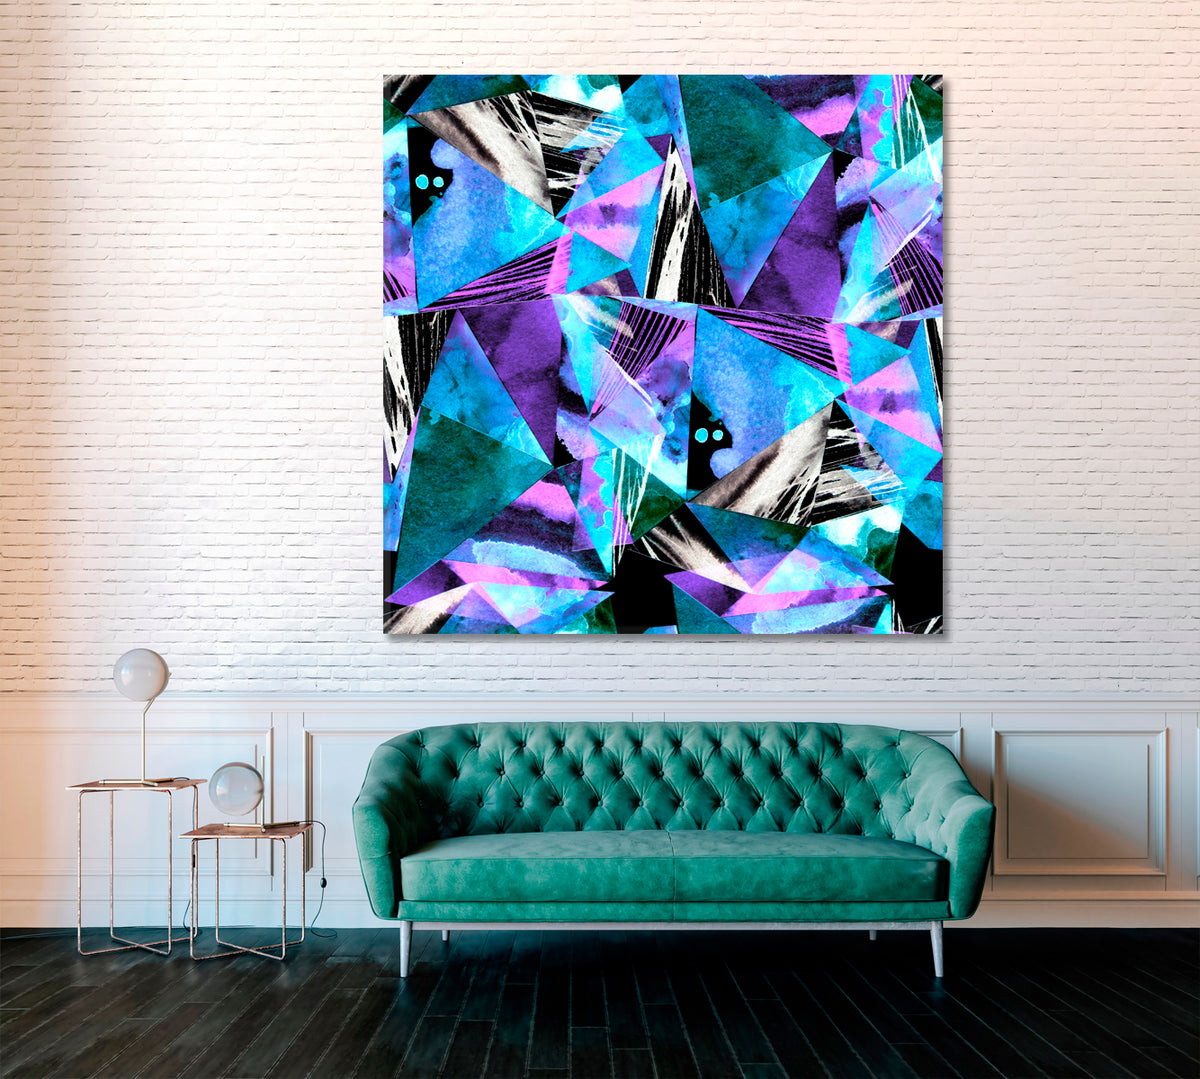 Abstract Colorful Triangles Canvas Print ArtLexy 1 Panel 12"x12" inches 